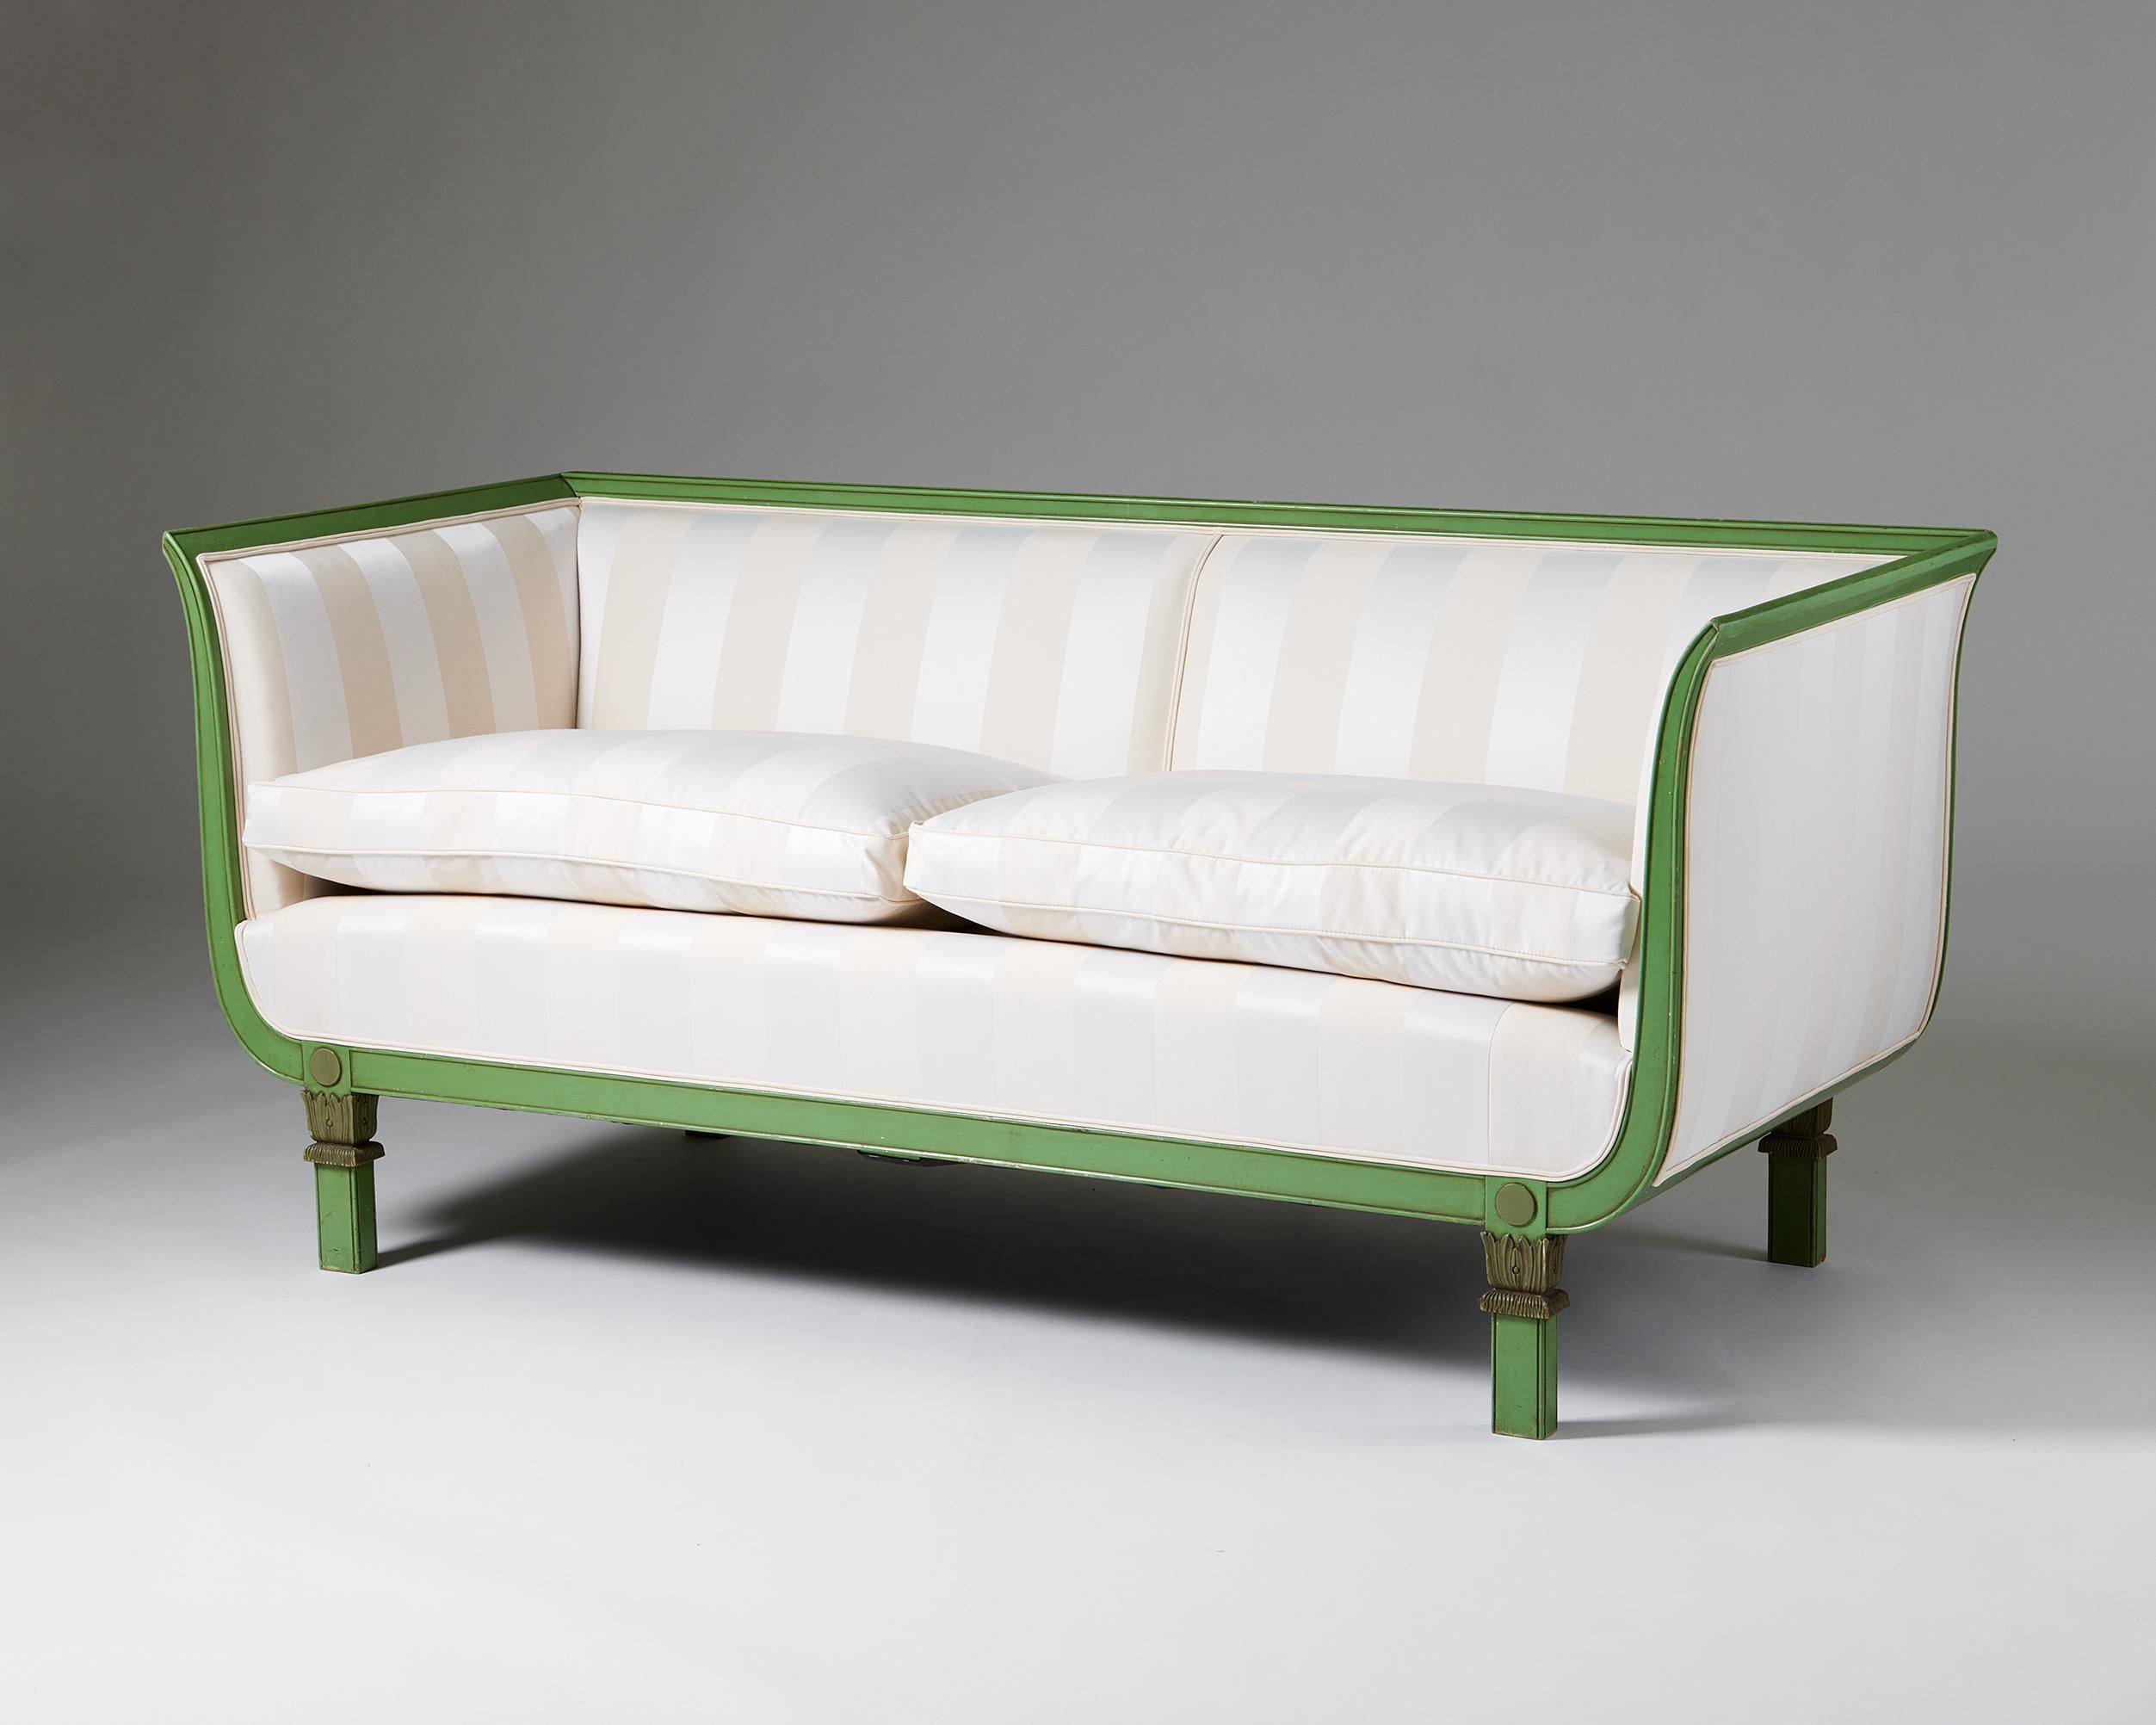 This generous two-seater sofa from the 1930s is a typical example of the Swedish Grace style, one of the twentieth century’s briefest yet most remarkable design periods. The shape resembles a simplified version of the nineteenth-century Swedish